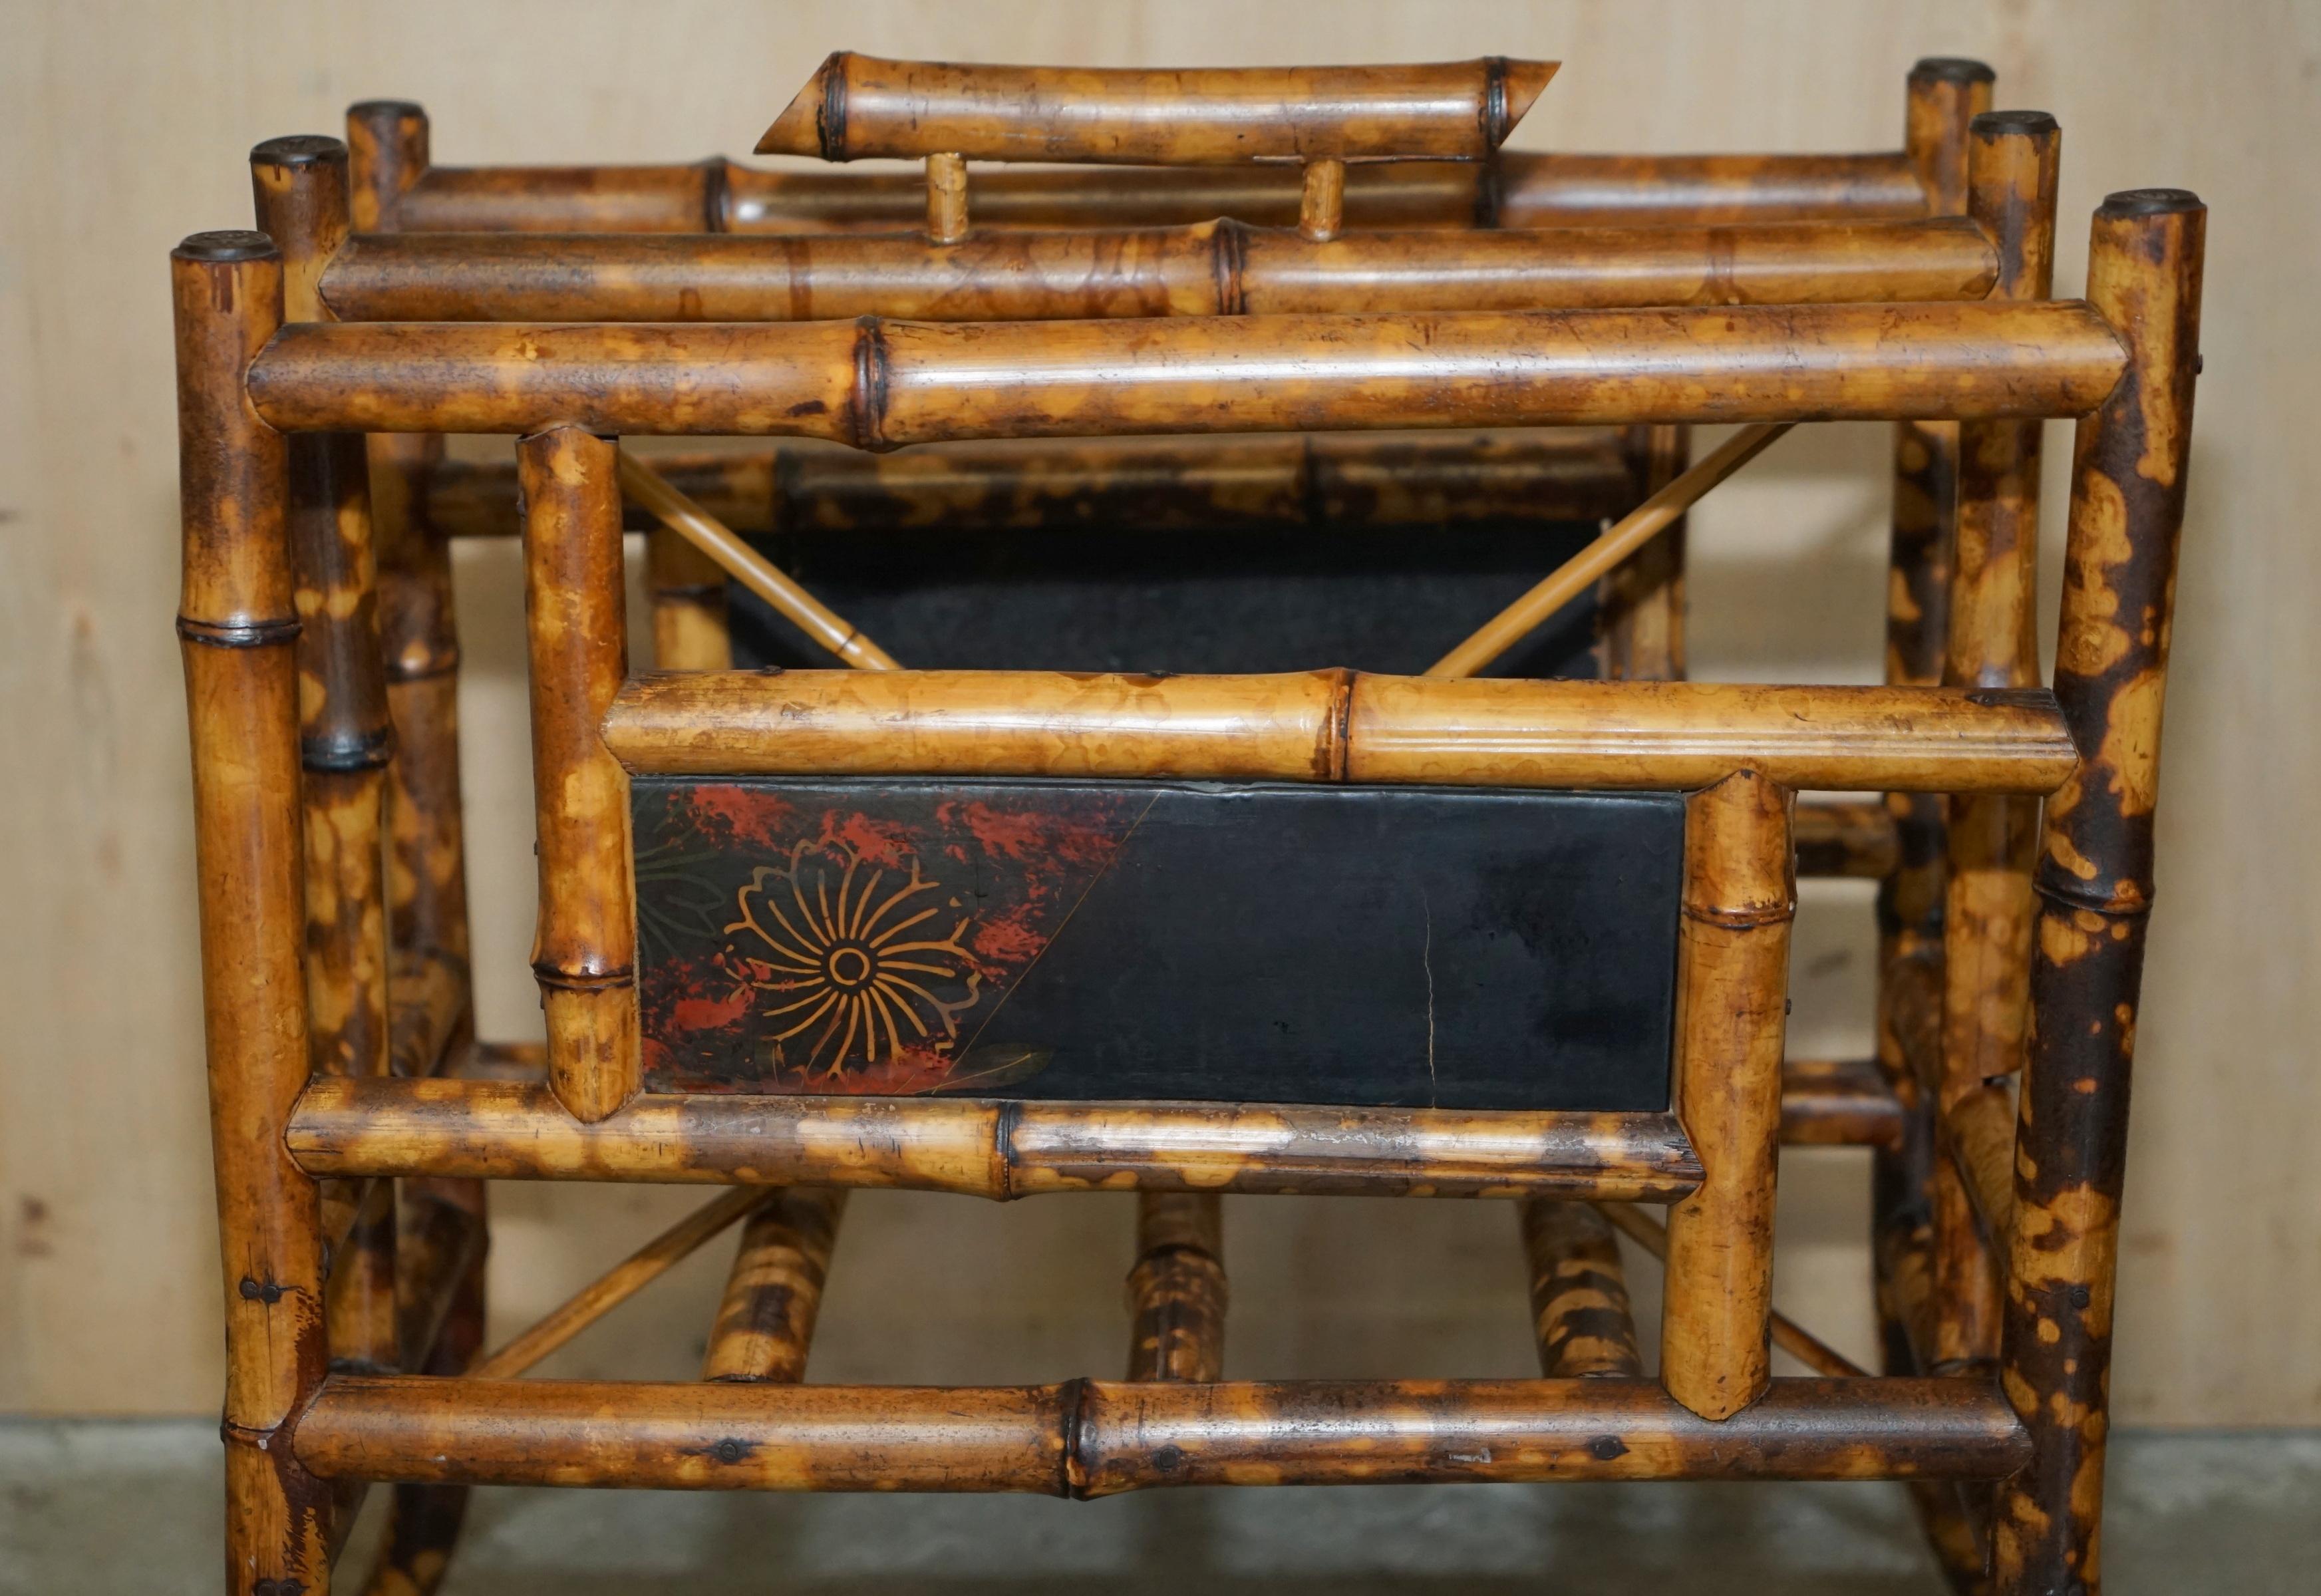 Aesthetic Movement ANTiQUE CIRCA 1880 AESTHETIC MOVEMENT BAMBOO CARVED CHINESE MAGAZINE PAPER RACK For Sale